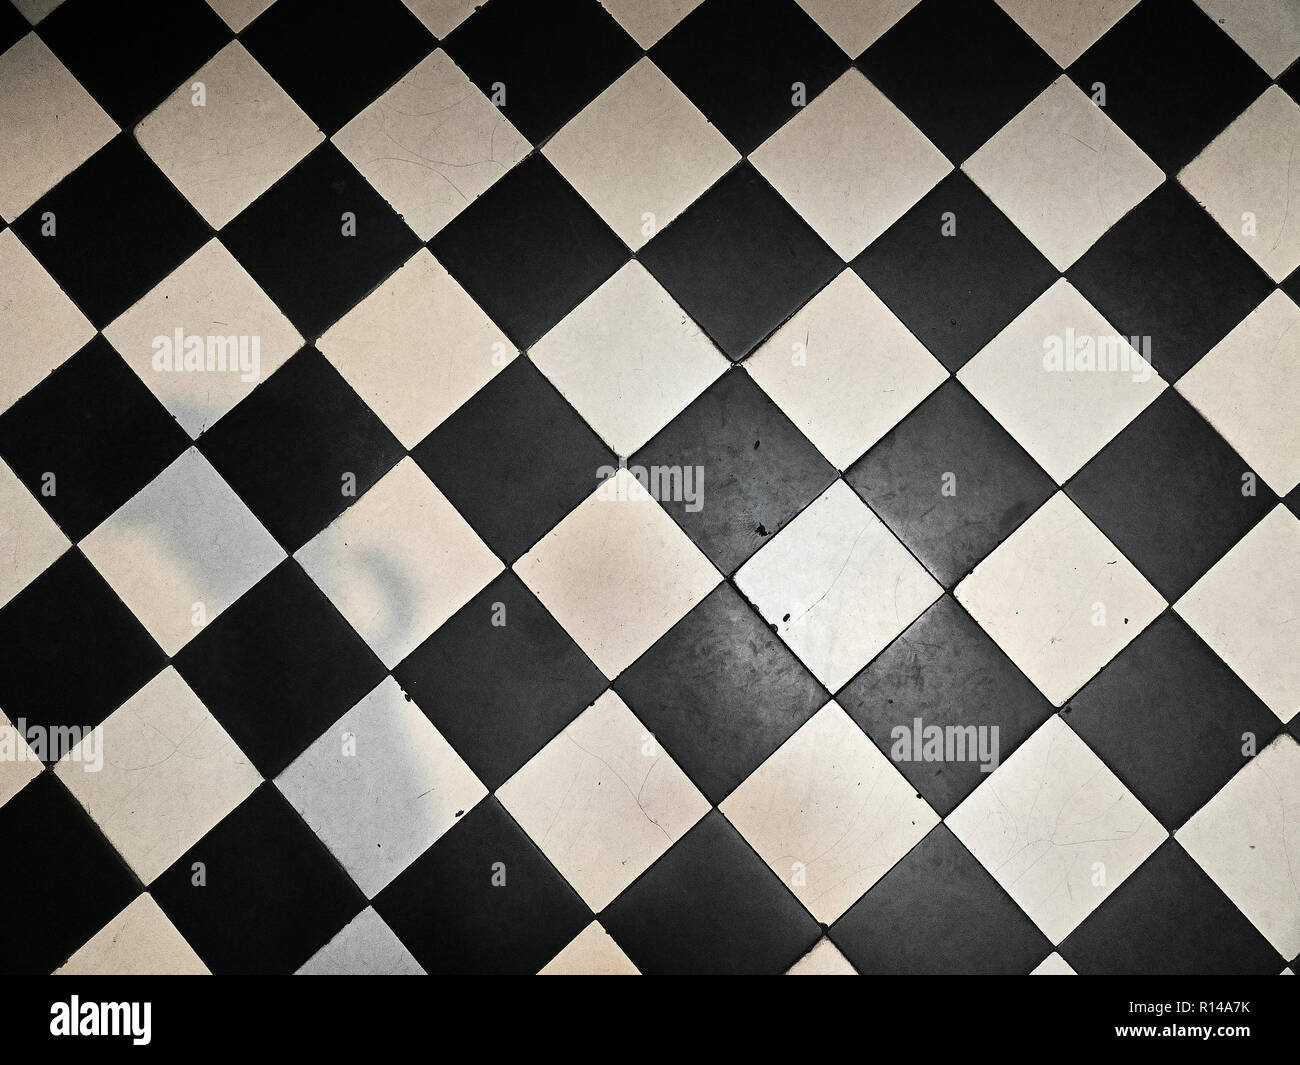 View of a black and white floor pattern Stock Photo